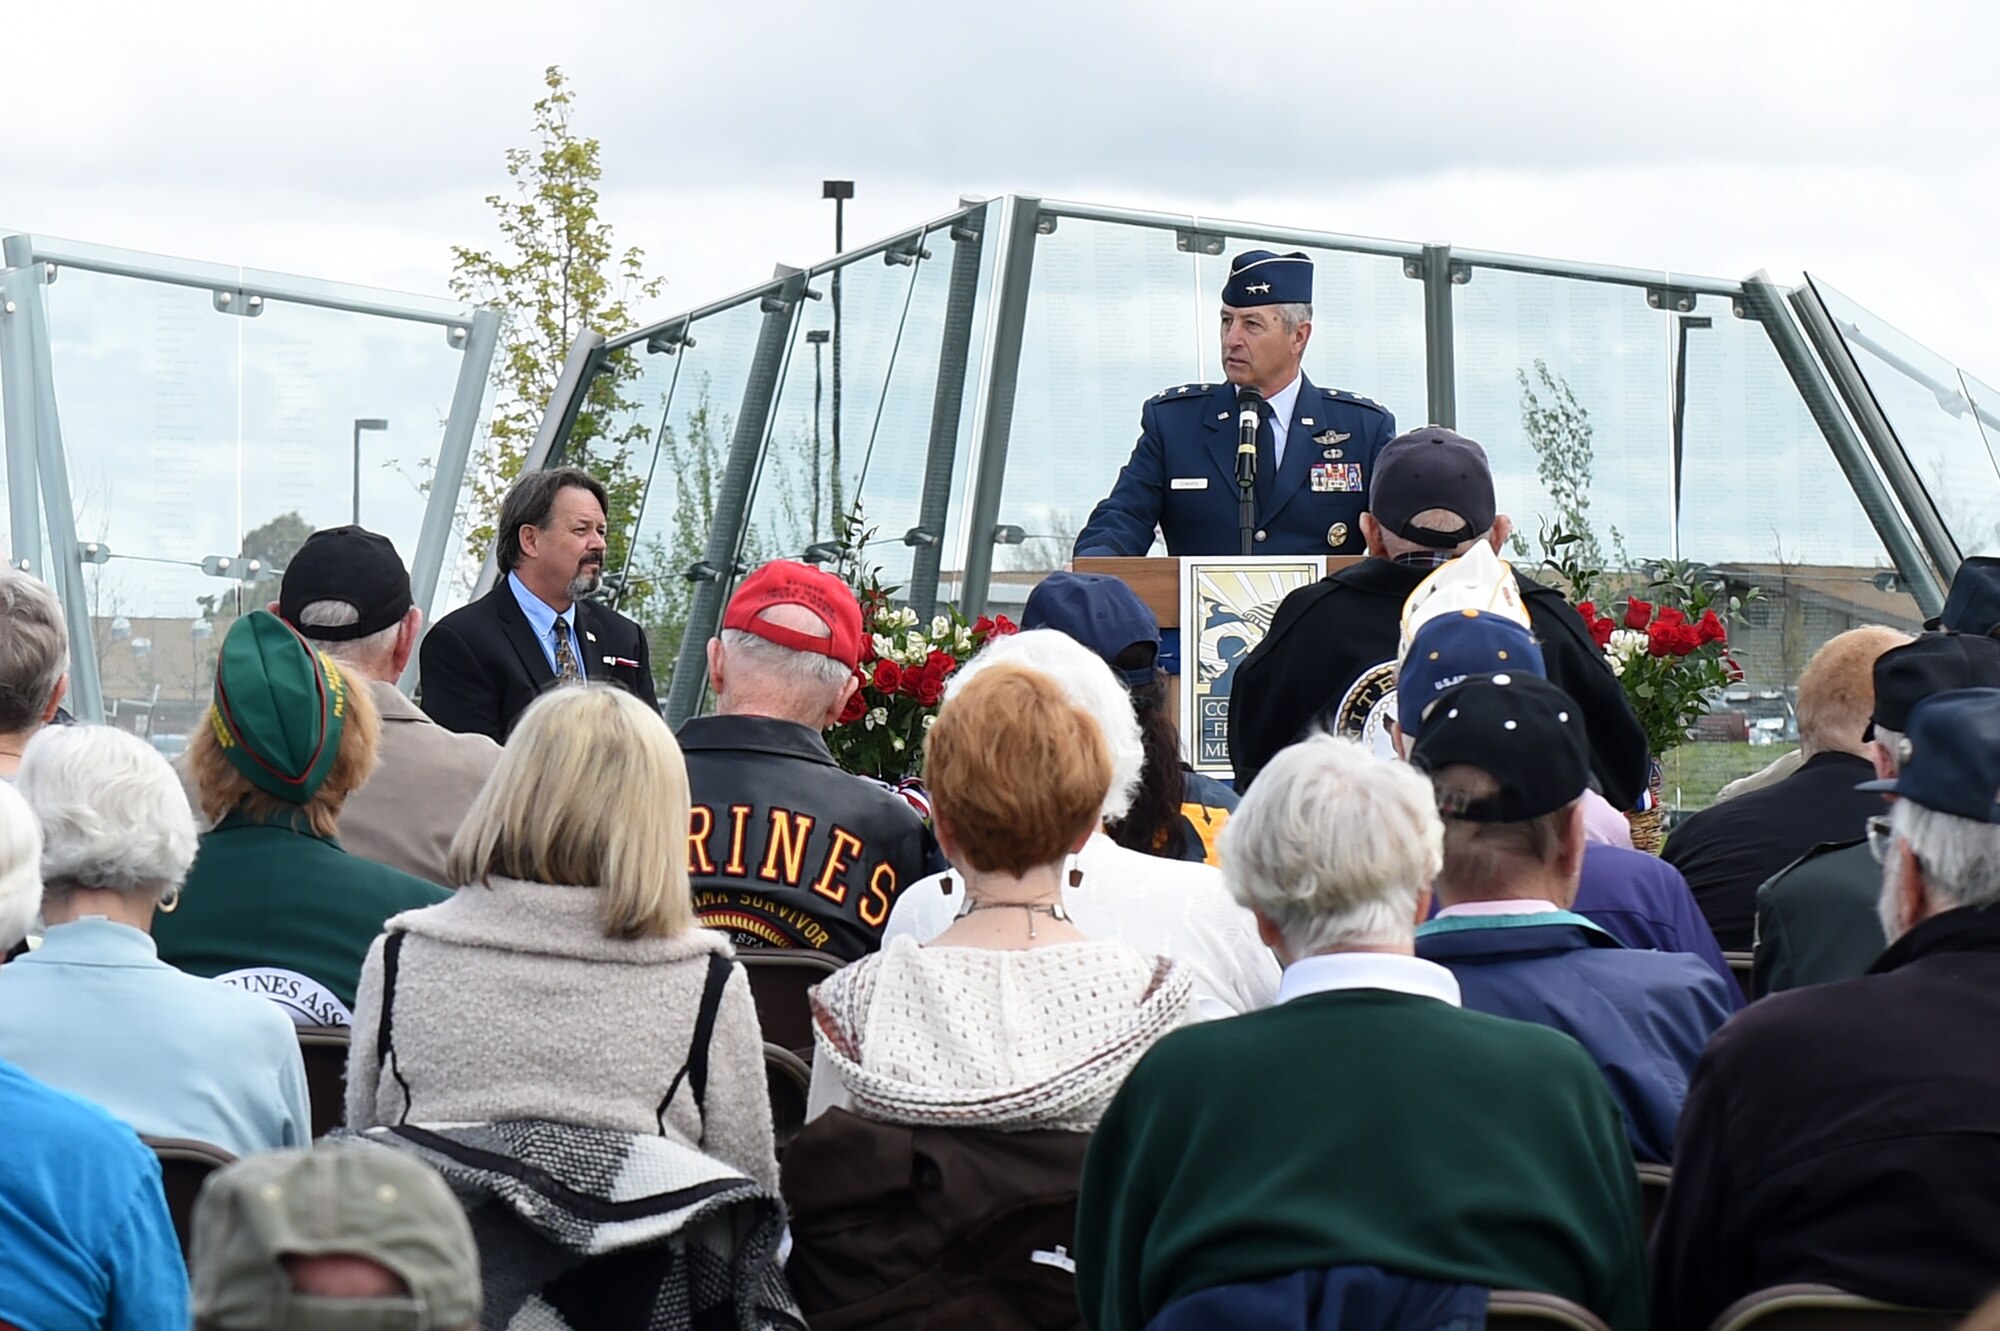 Maj. Gen. Michael Edwards, Adjutant General for Colorado, speaks to the crowd during the Memorial Day ceremony May 23, 2015, at the Colorado Freedom Memorial in Aurora, Colorado. This year’s ceremony had multiple guest speakers, flyovers, military displays and also marked the 70th anniversary of the end of World War II. (U.S. Air Force photo by Airman 1st Class Emily E. Amyotte/Released)